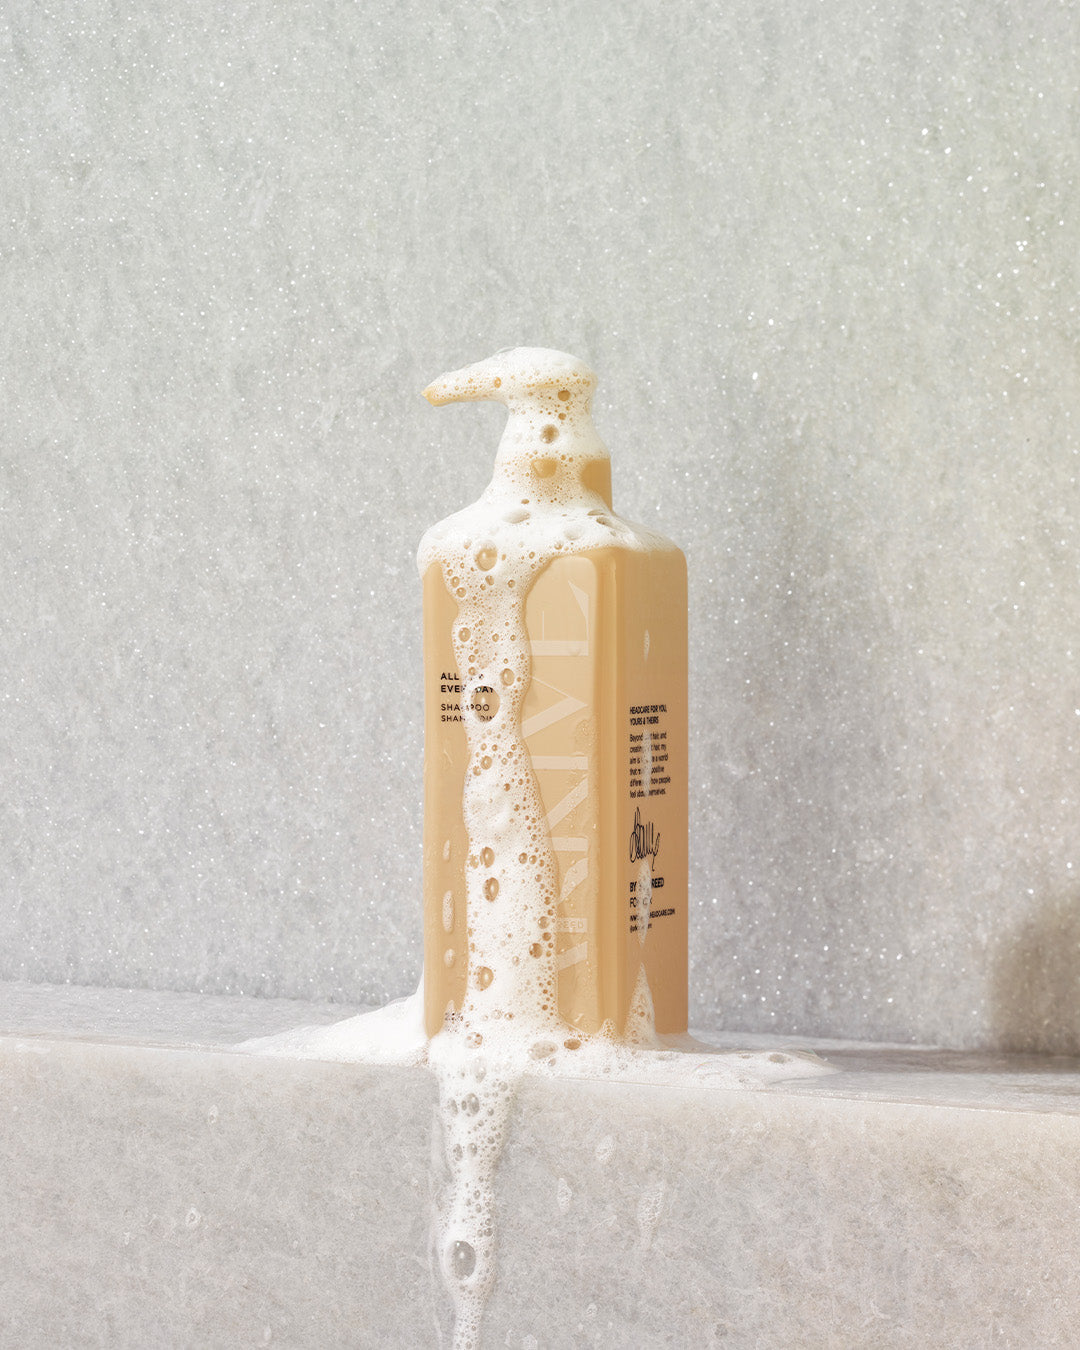 A bottle of Arkive's all day everyday shampoo resting on a shower ledge with foam